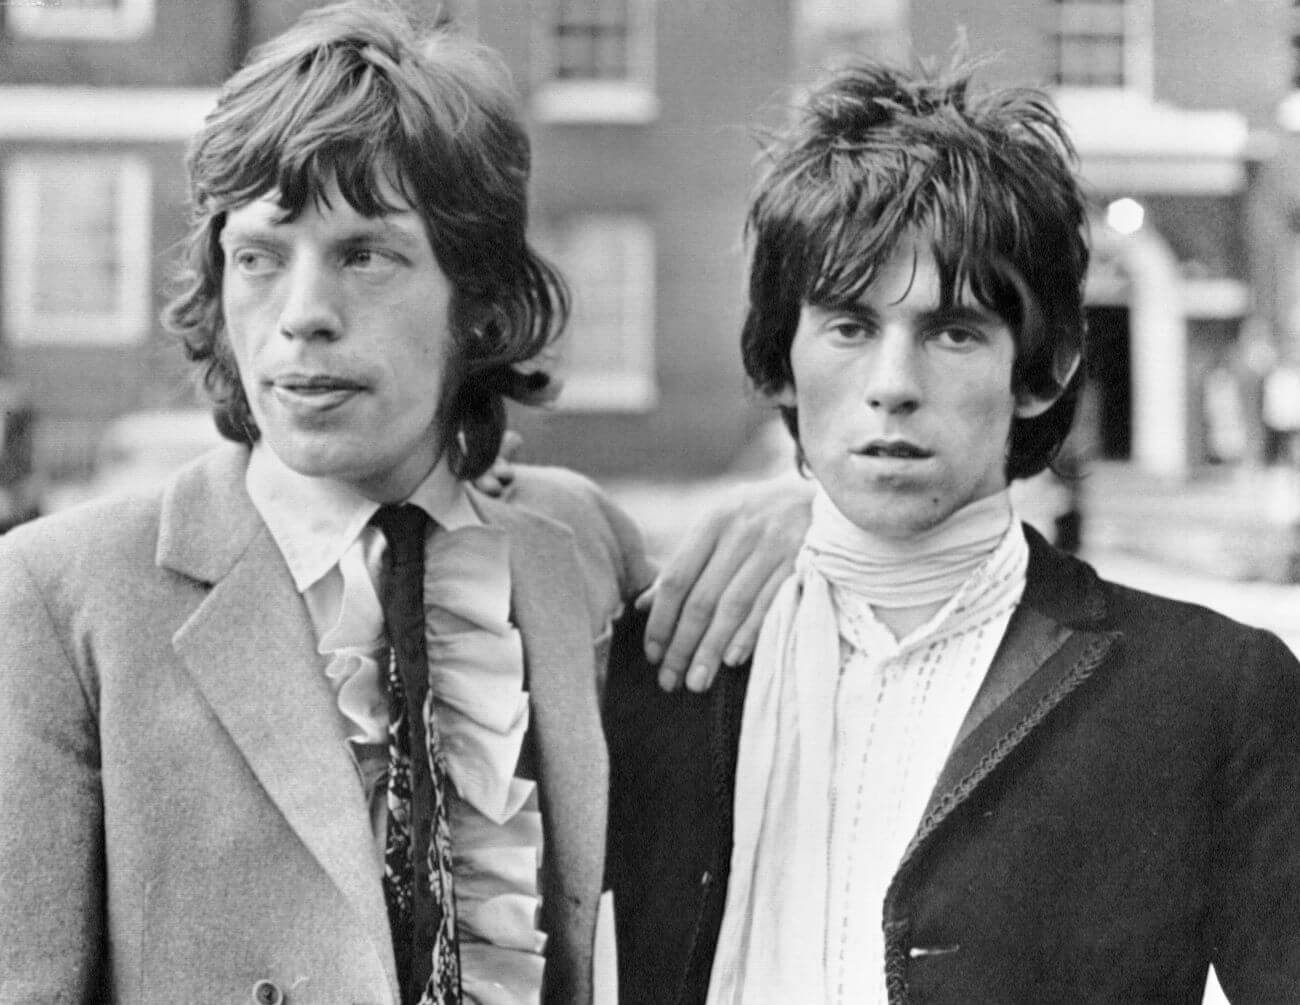 A black and white picture of Mick Jagger standing with his hand on Keith Richards' shoulder.